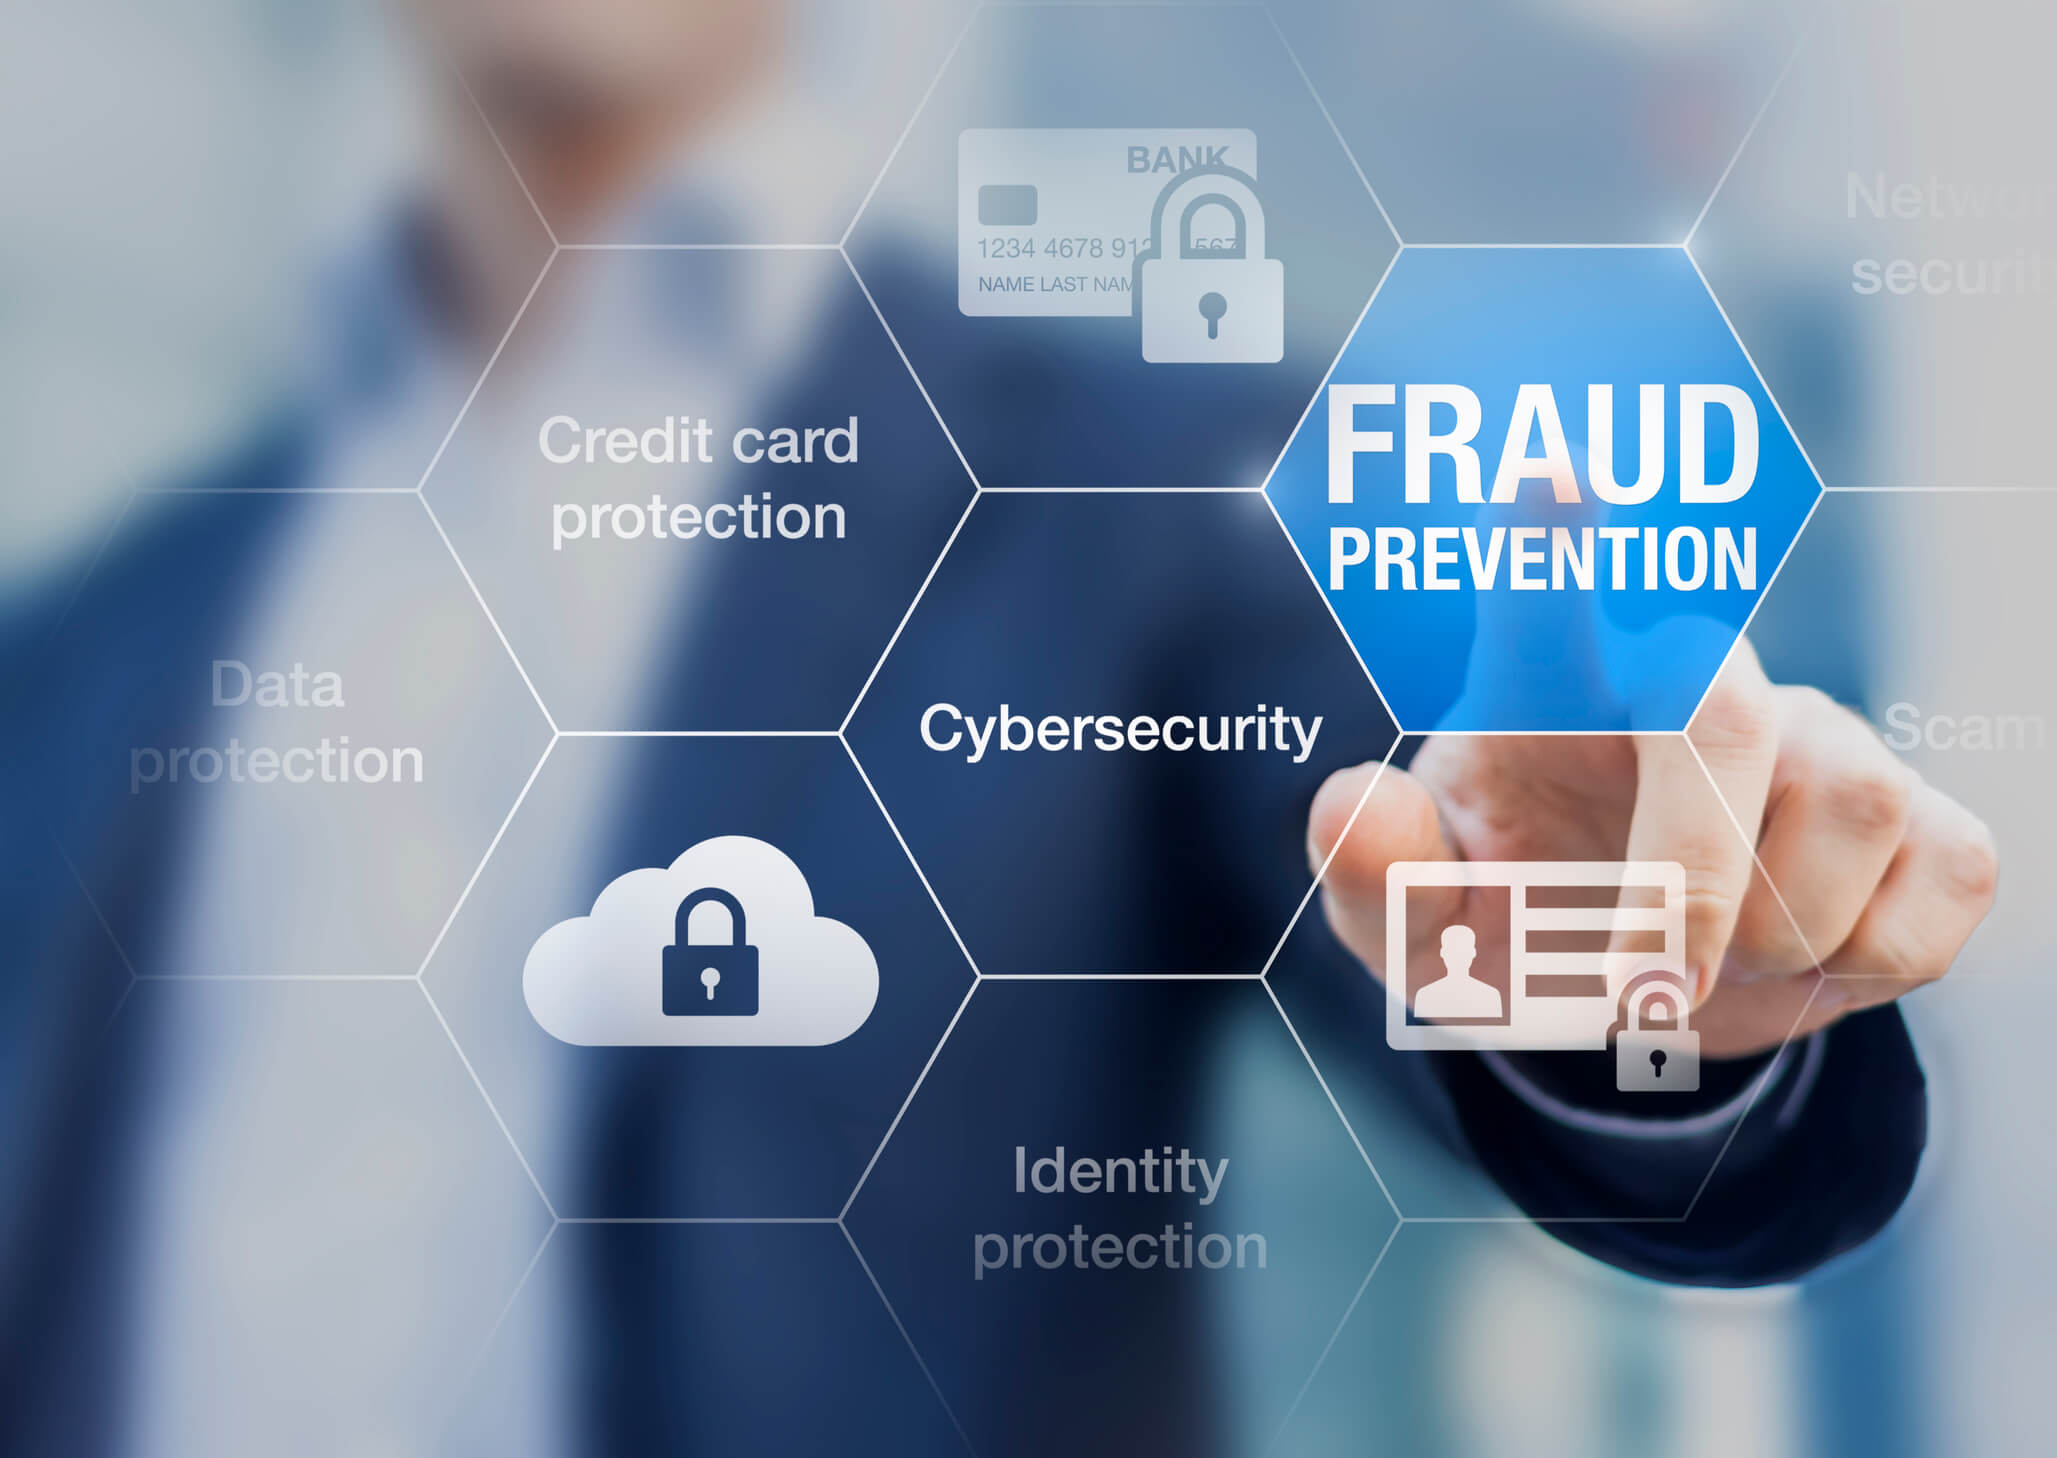 Fraud Prevention graphic